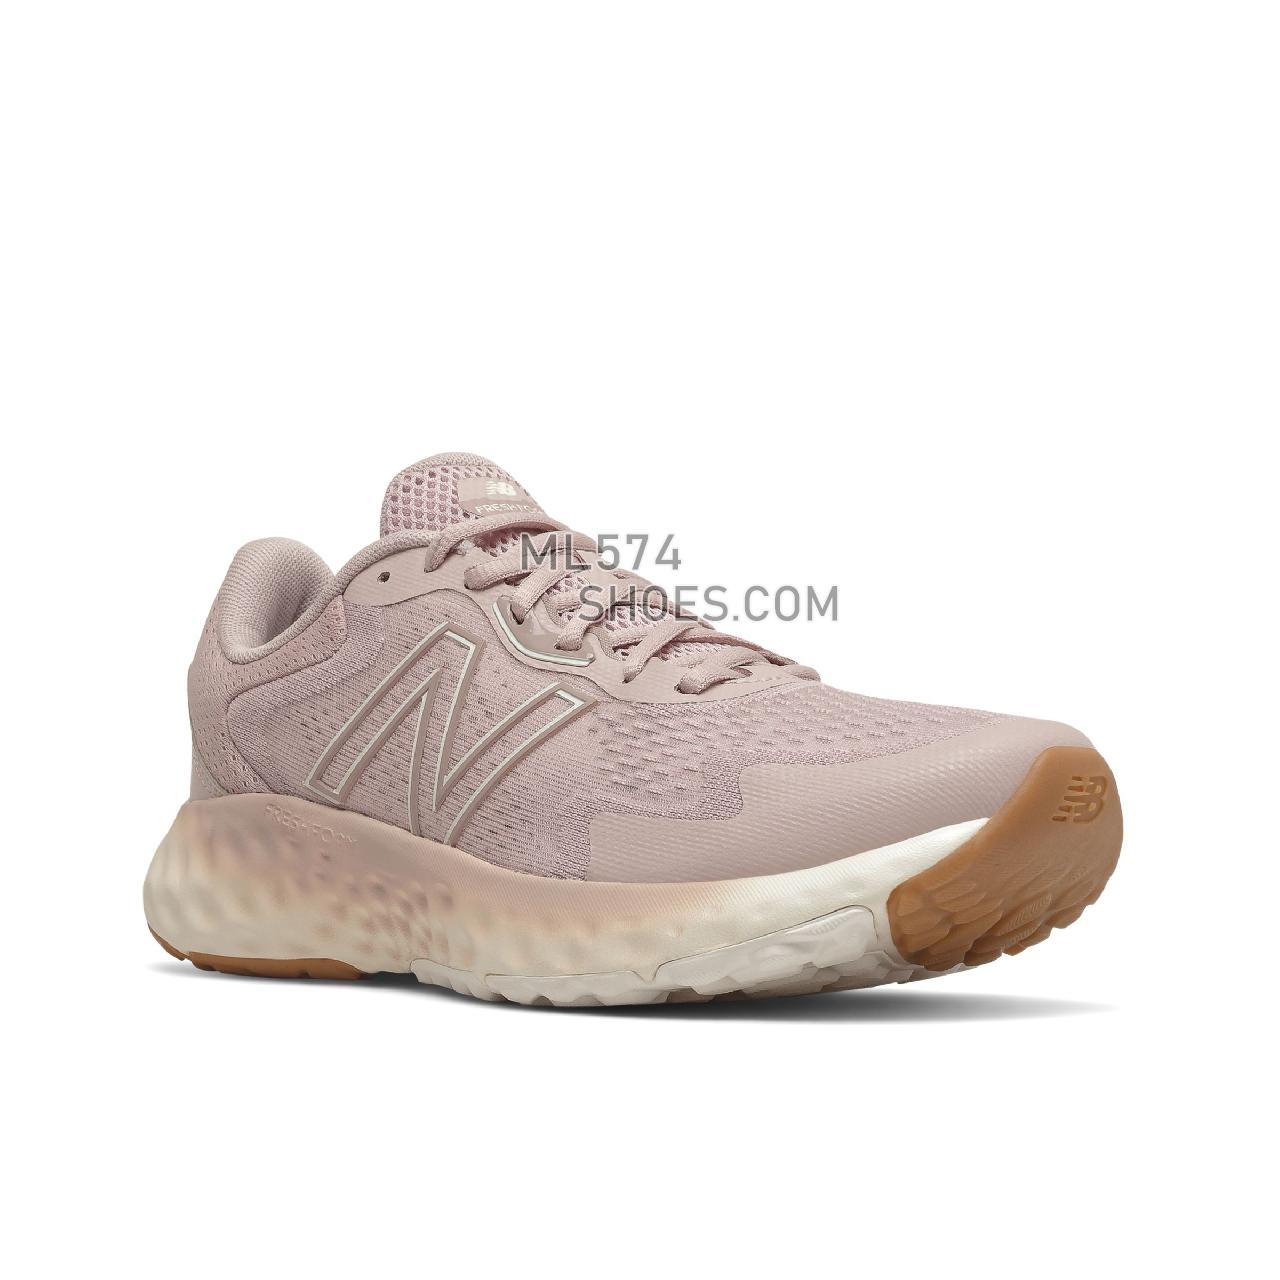 New Balance WEVOZV1 - Women's Classic Sneakers - Oyster Pink - WEVOZCN1